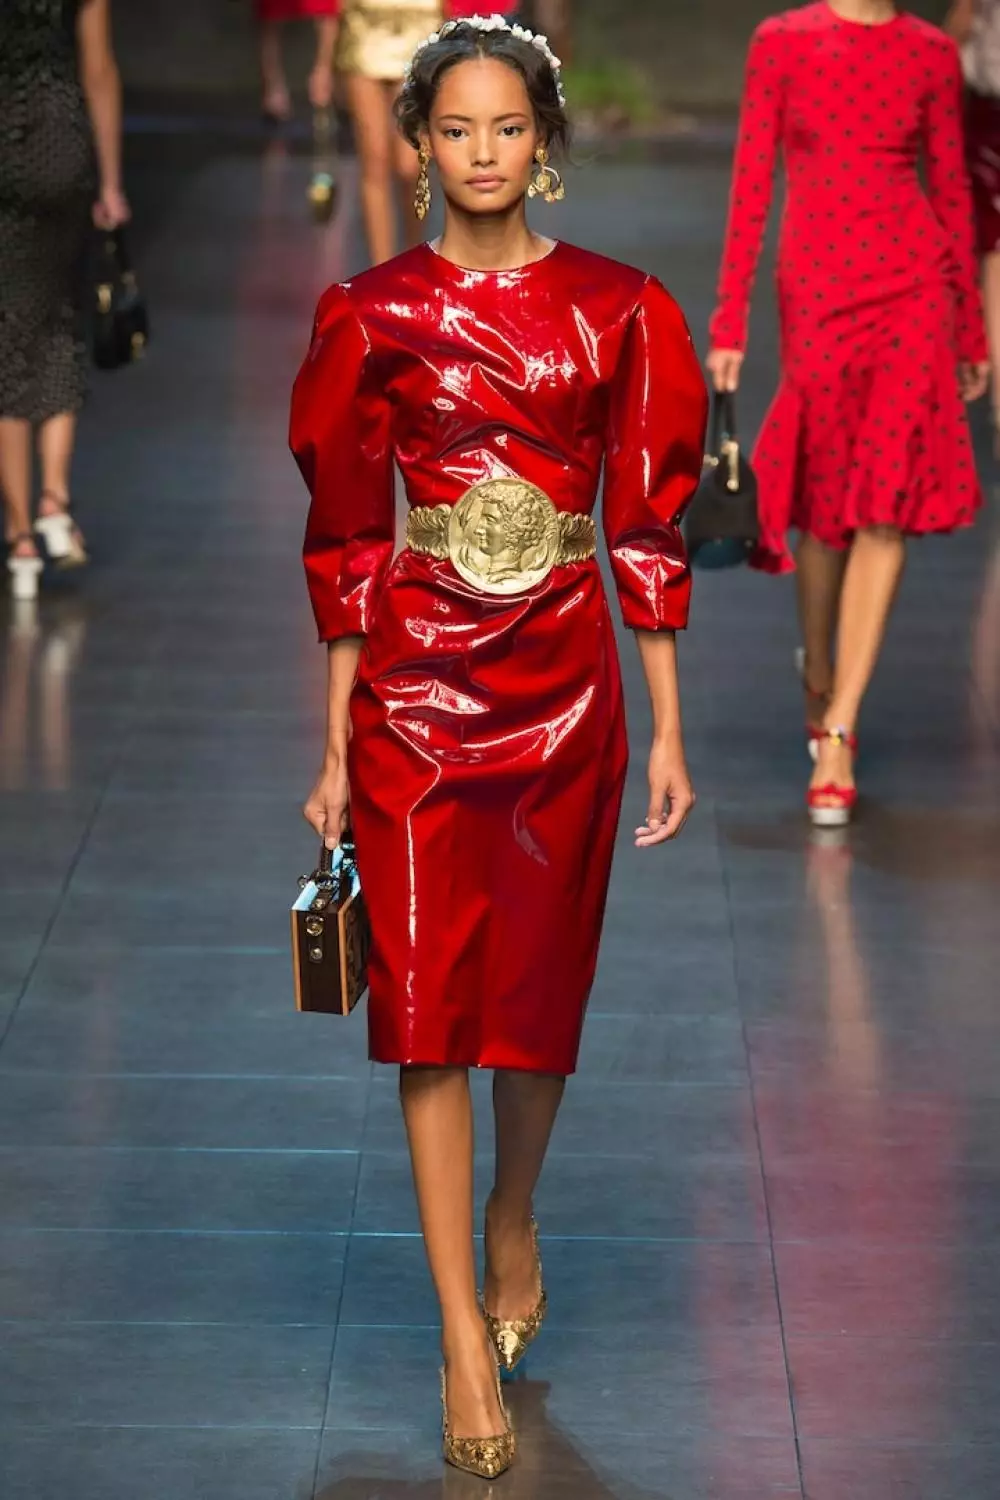 Red leather evening dress from Dolce and Gabbana